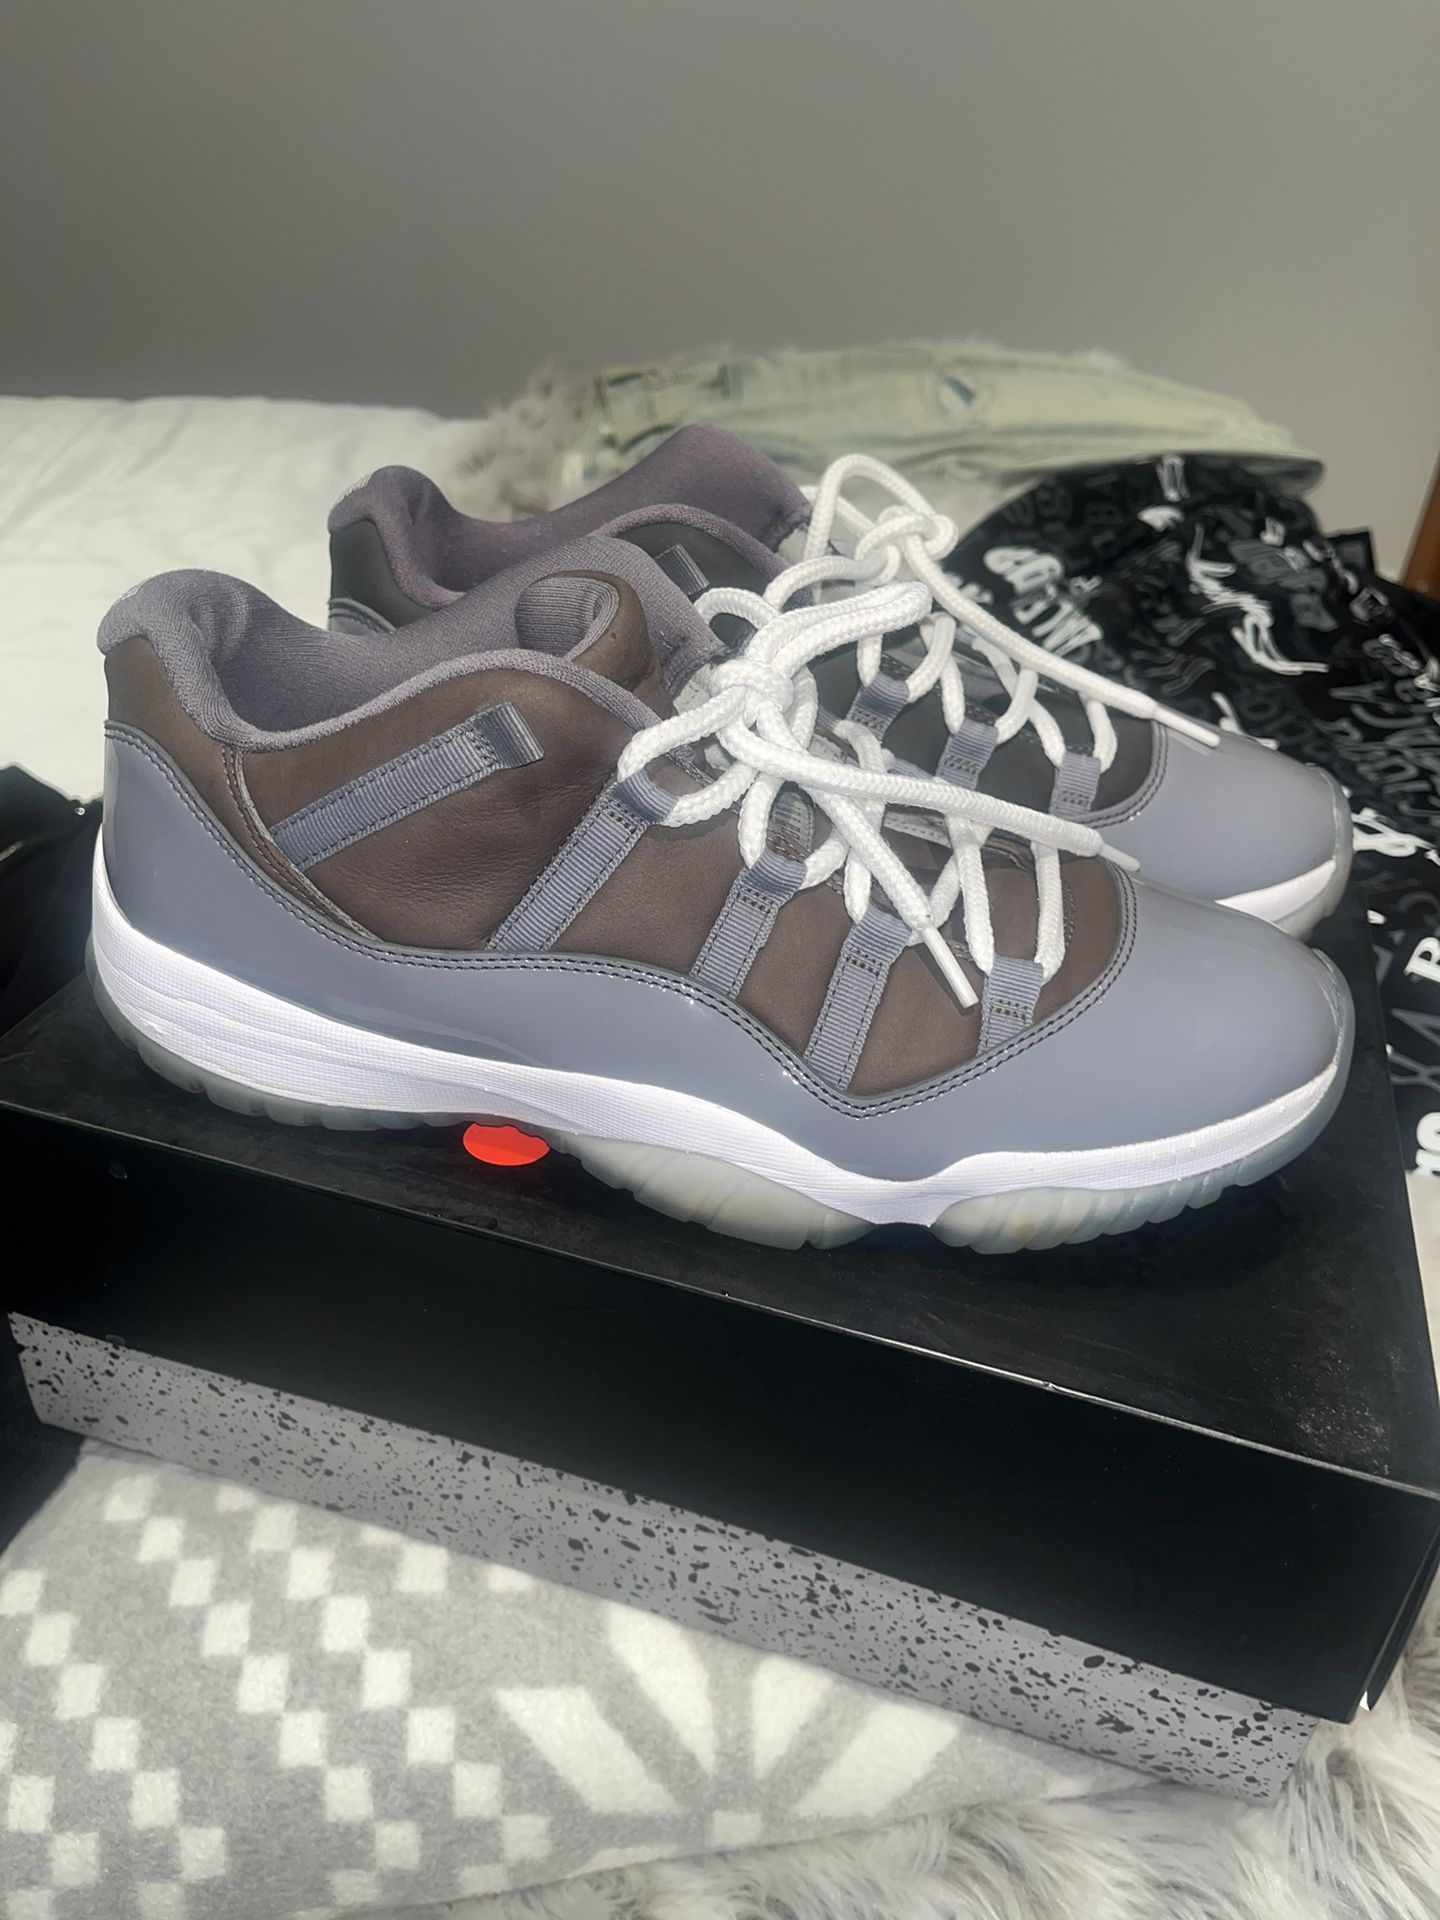 Low Top Cool Grey 11 Size 12